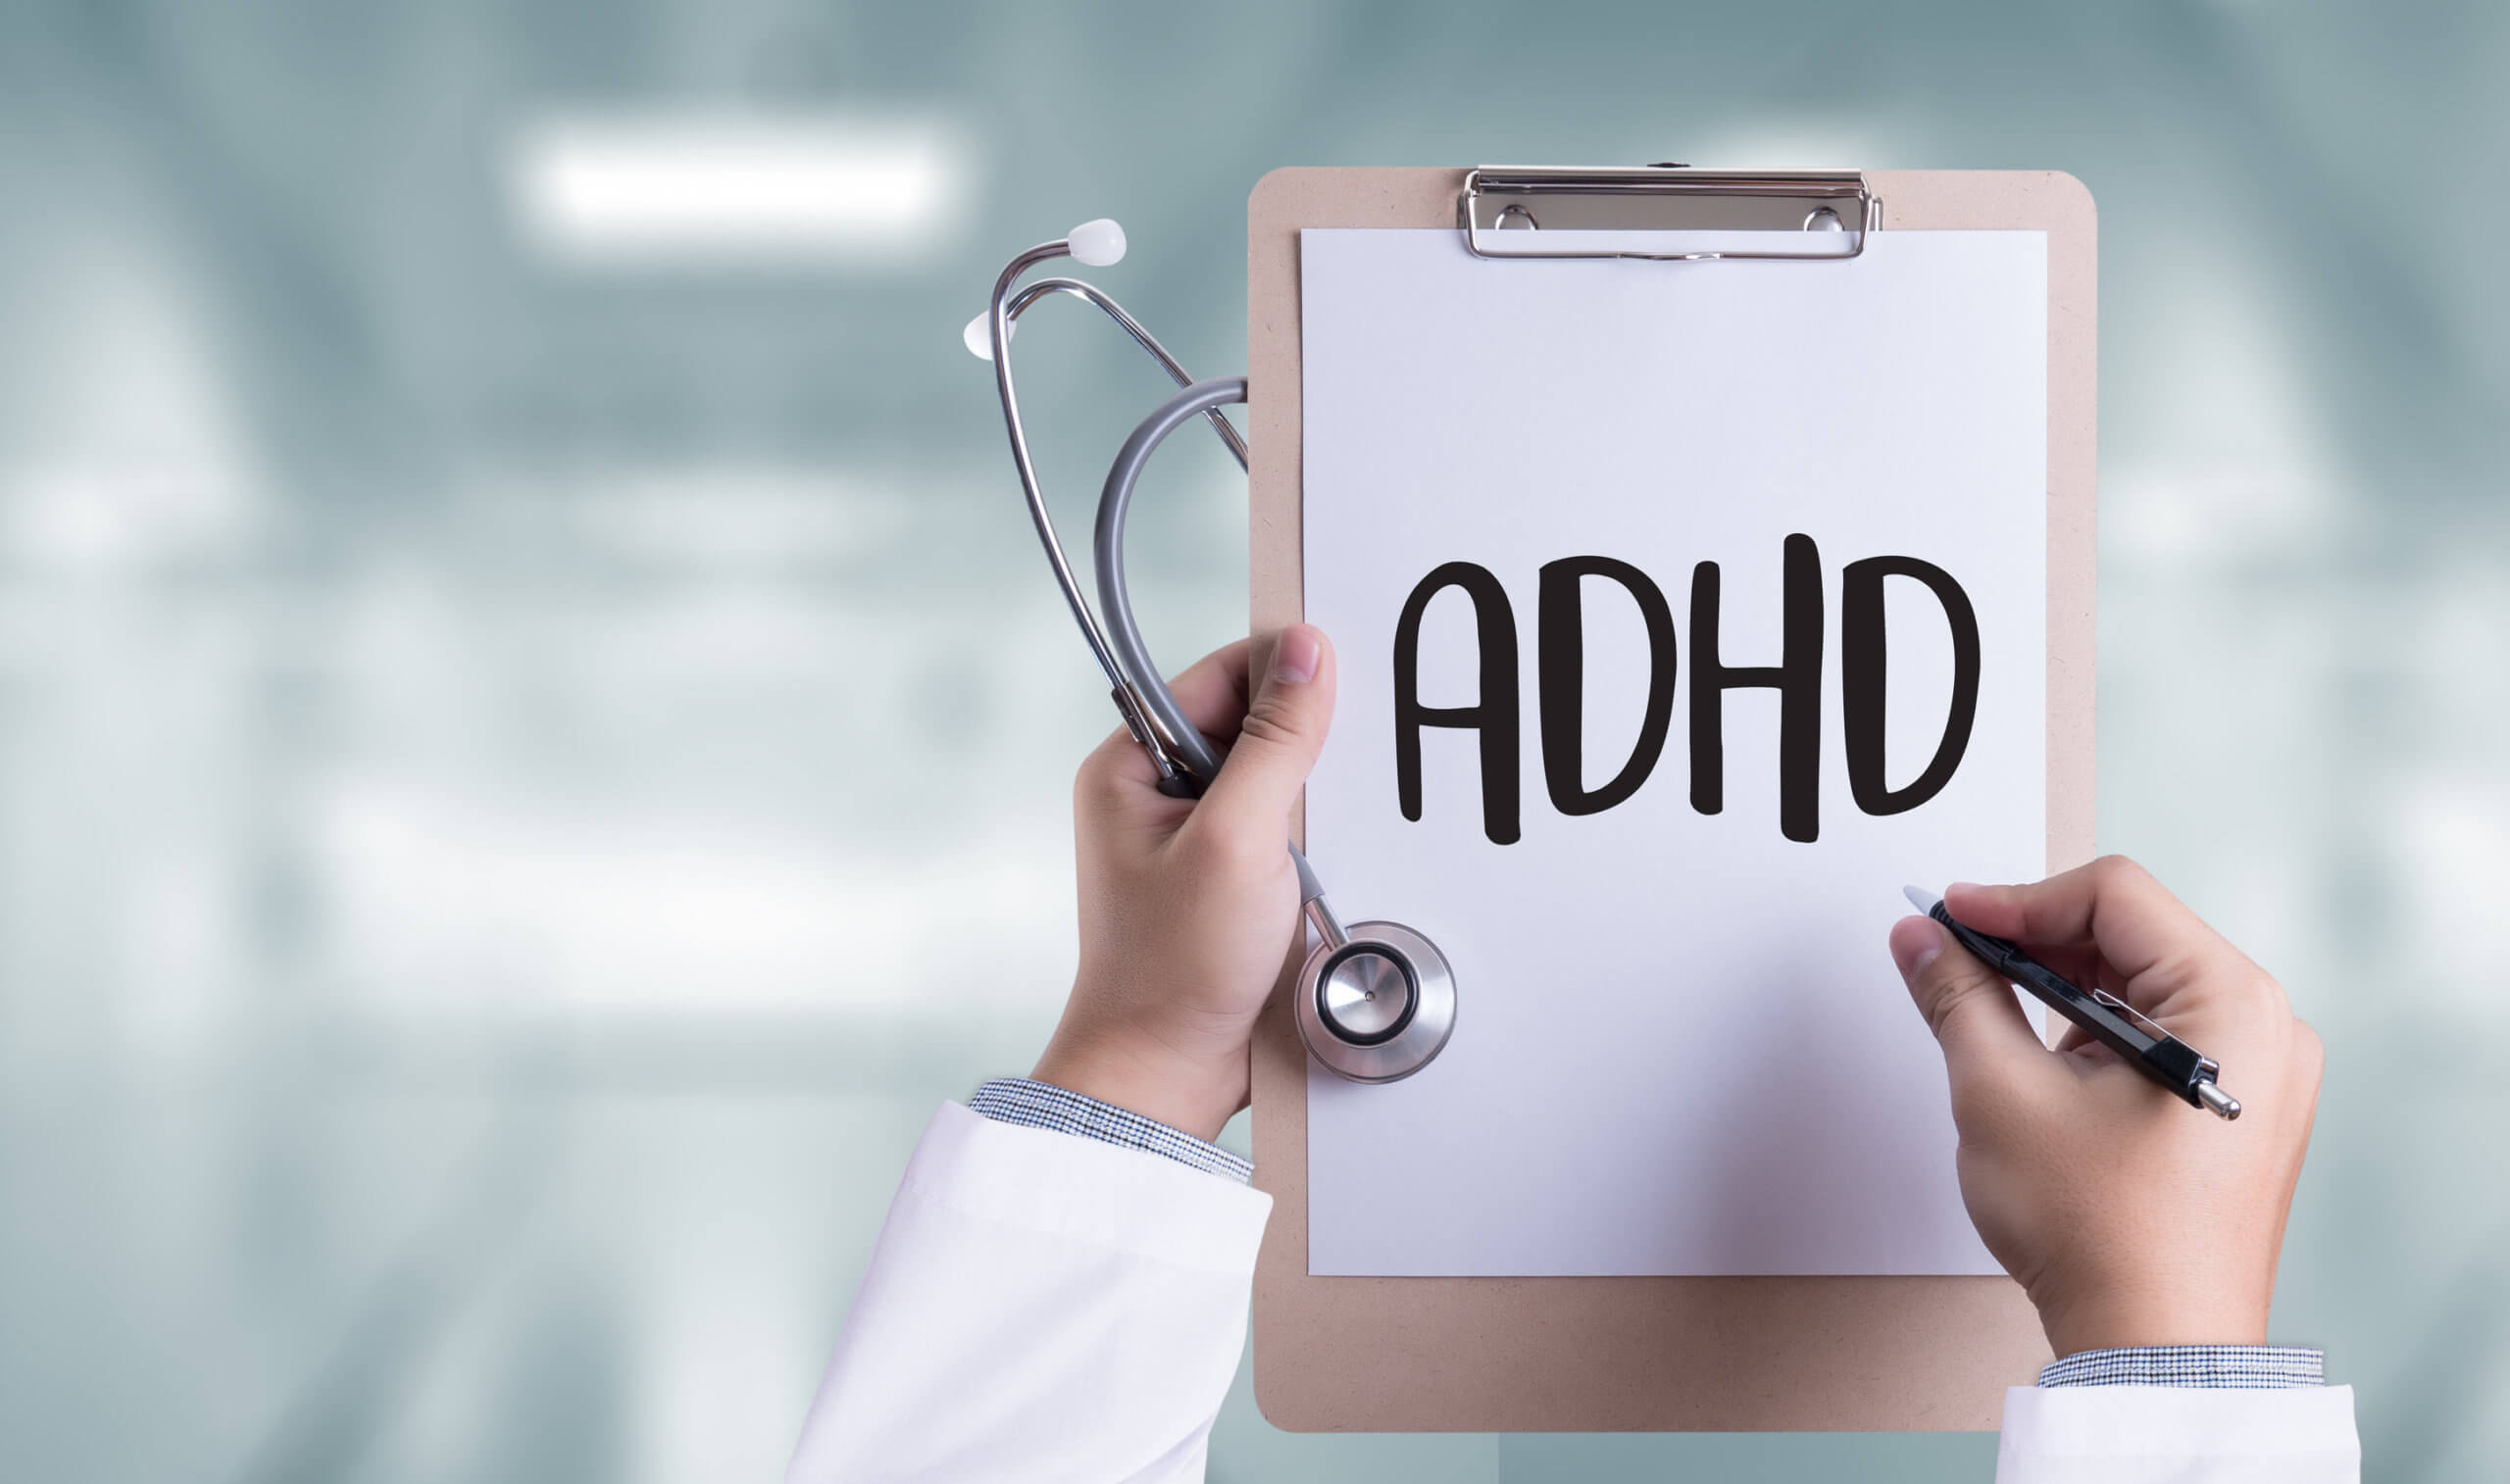 Featured image for “What are the 2 major drugs used in treatment of ADHD?”